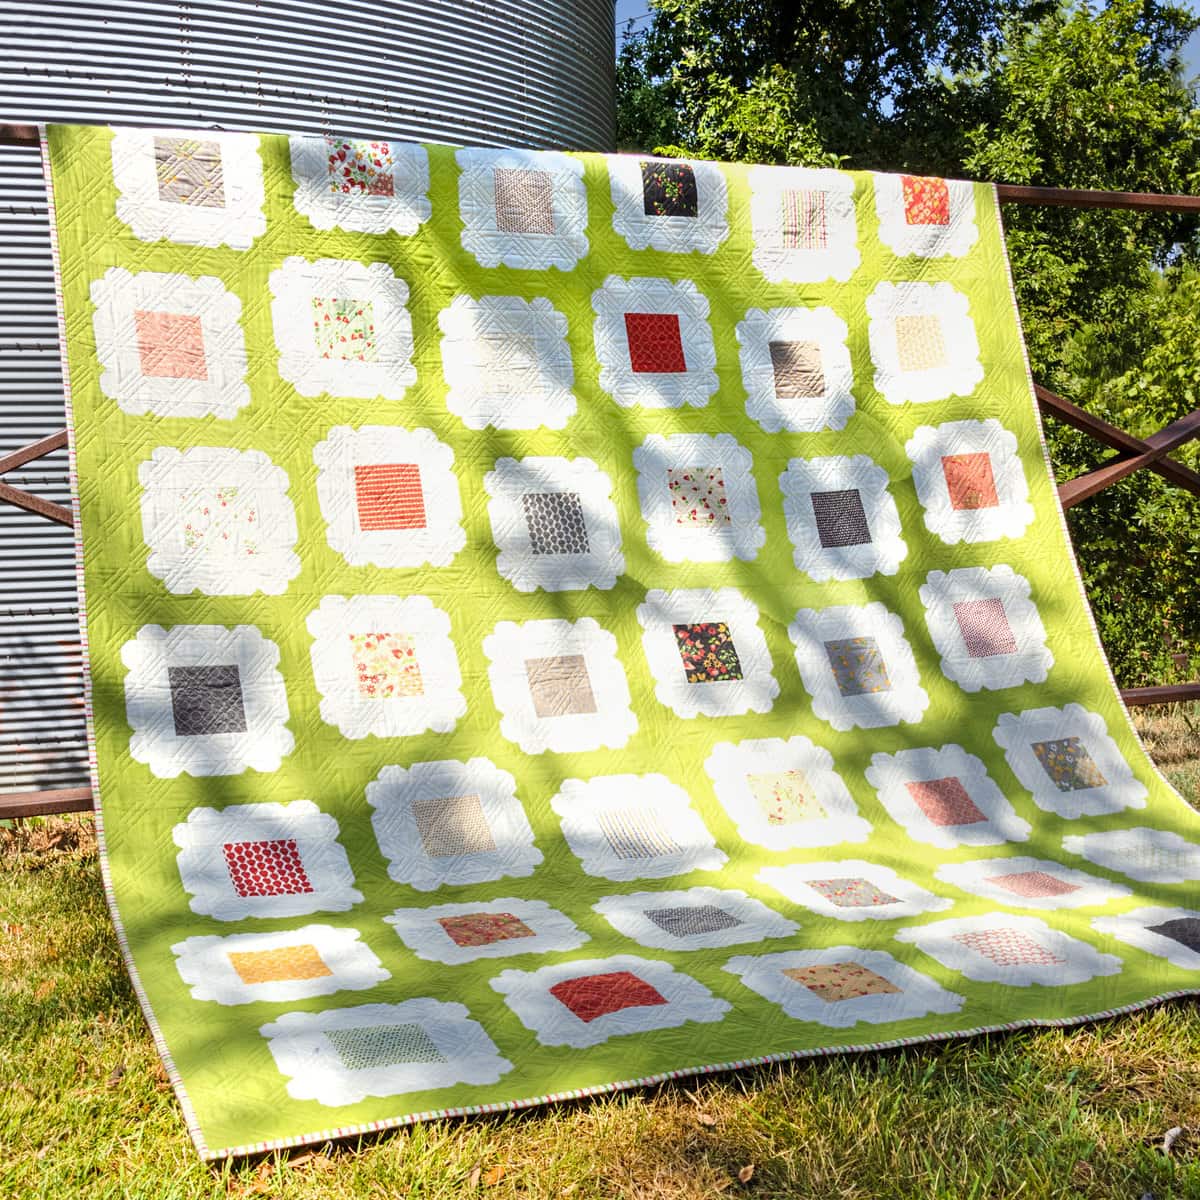 1 Panel + 1 Charm Pack = 1 Precious Baby Quilt! 